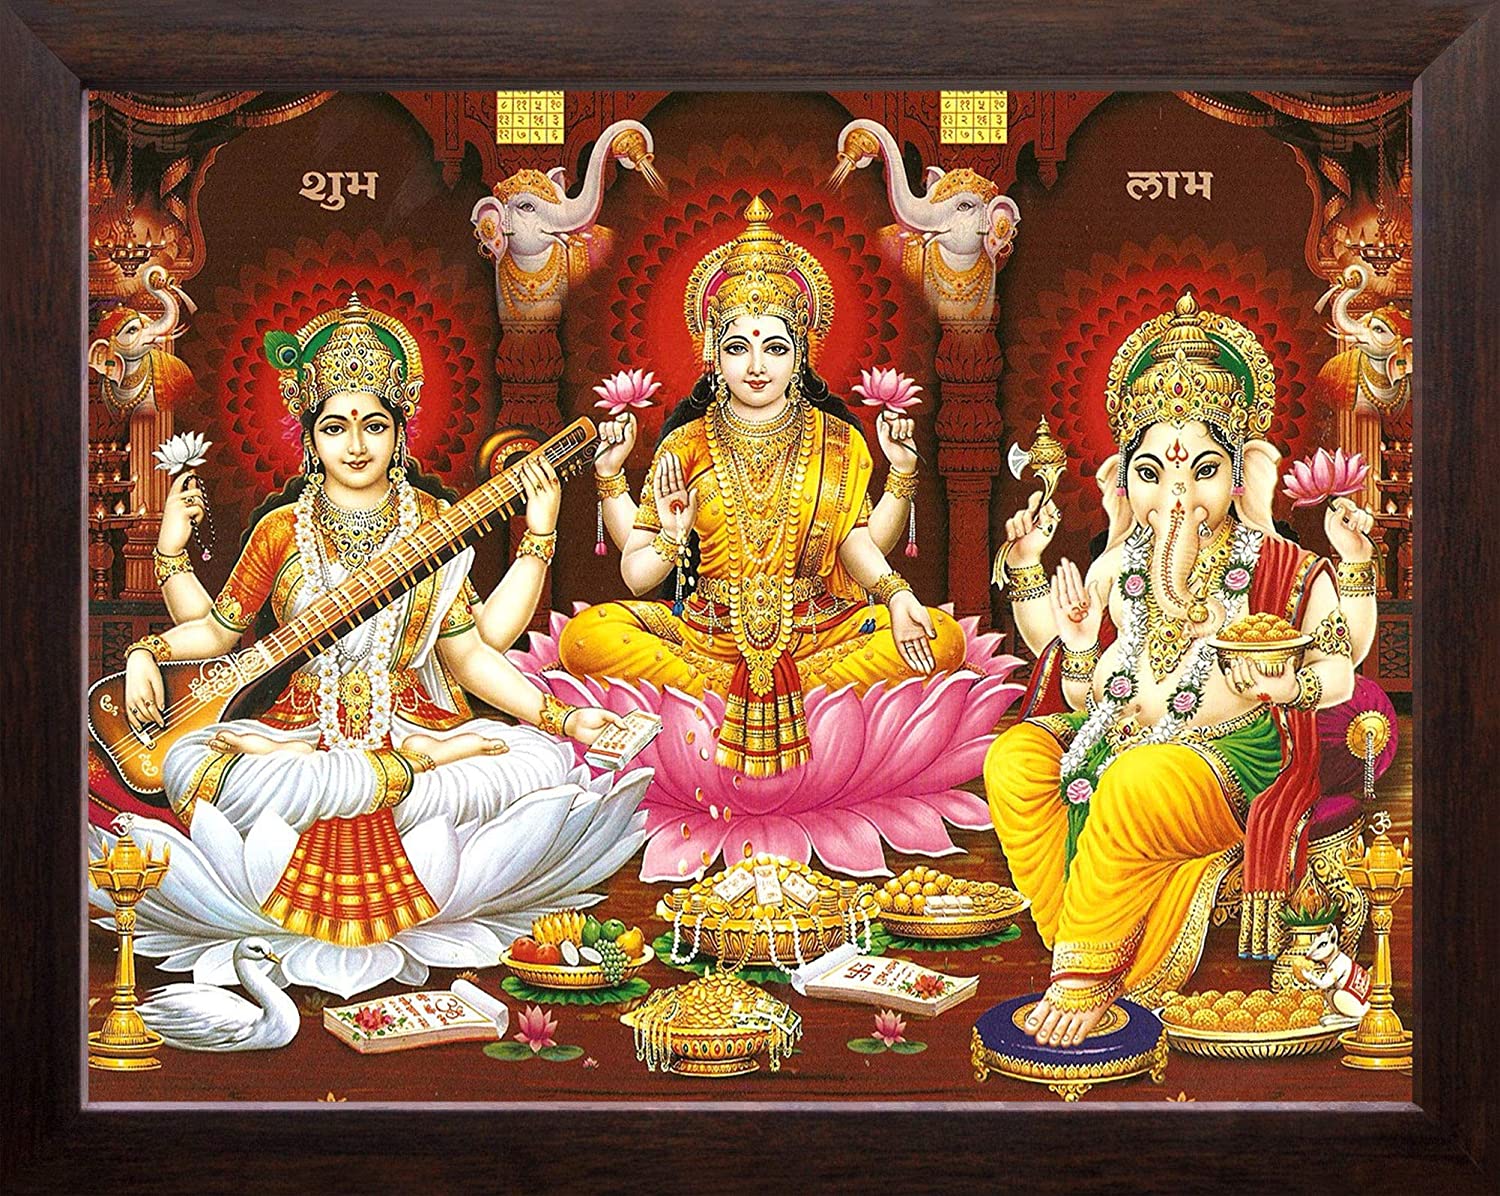 Art n Store MATA Lakshmi with Devi Saraswati & Lord Ganesha HD Printed Religious & Decor Picture with Plane Brown Frame (30 X 23.5 X 1.5 cm_ Brown Wood): Amazon.in: Home & Kitchen